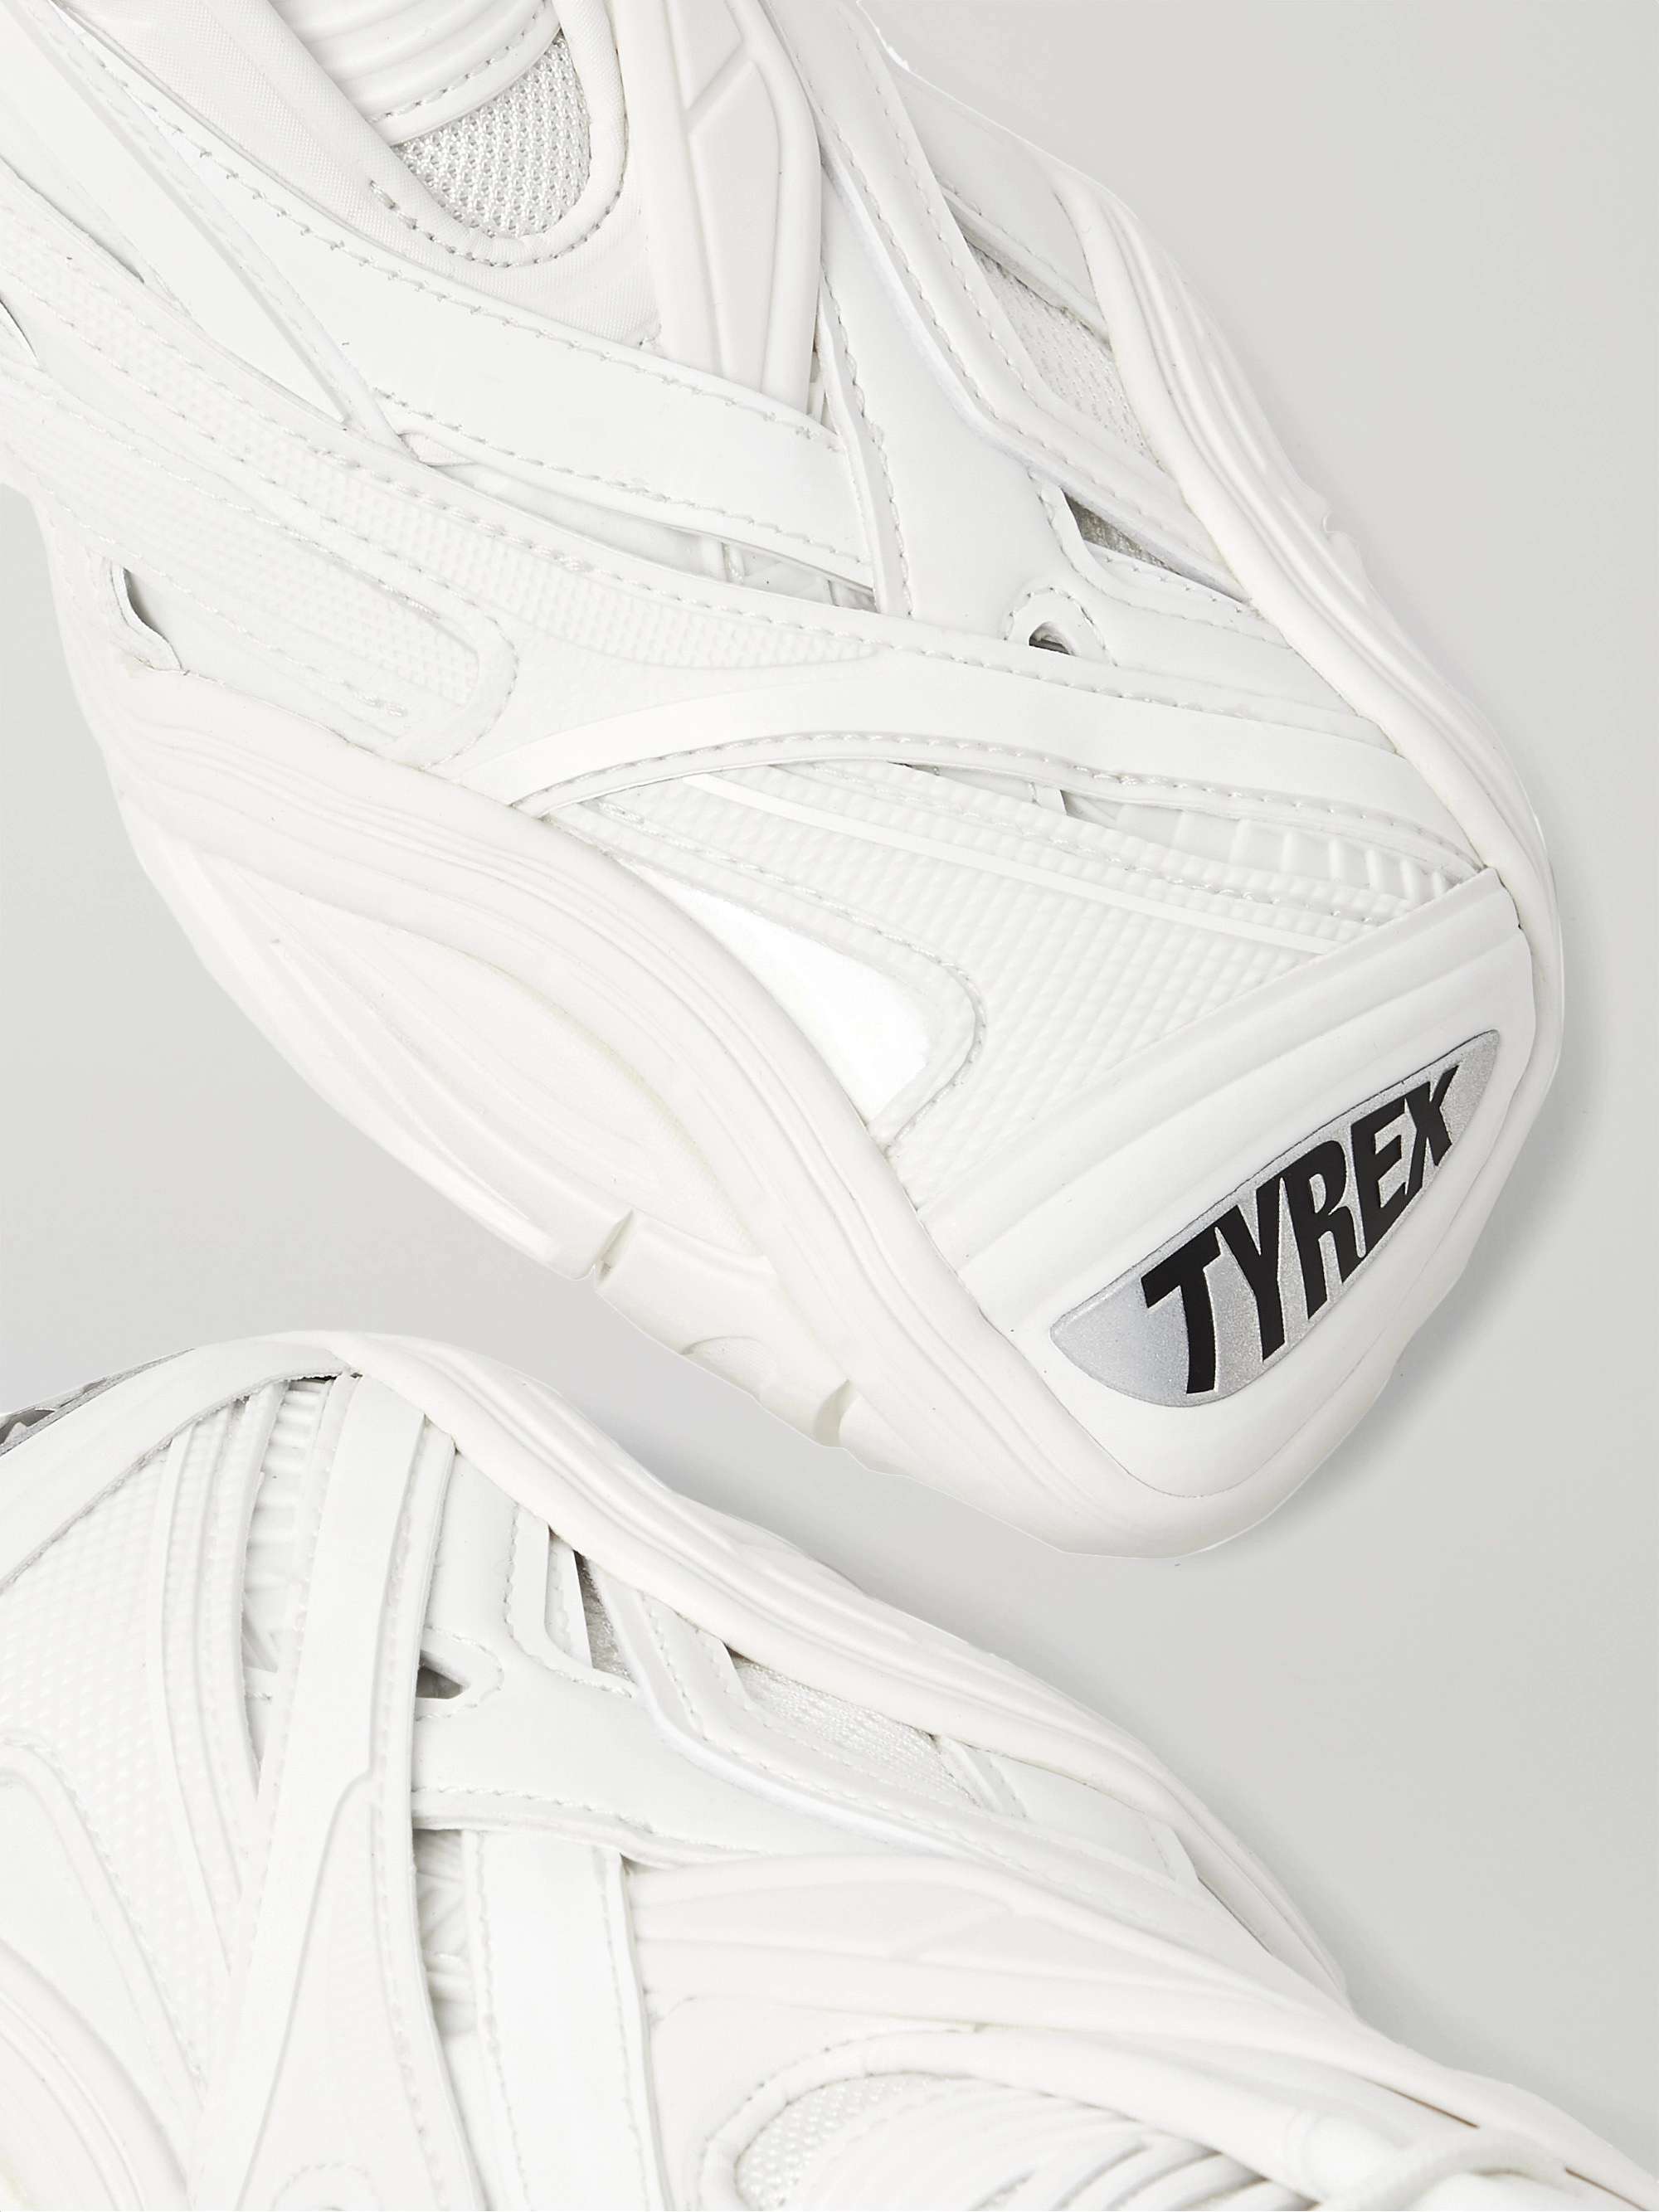 BALENCIAGA Tyrex Rubber, Mesh and Faux Leather Sneakers